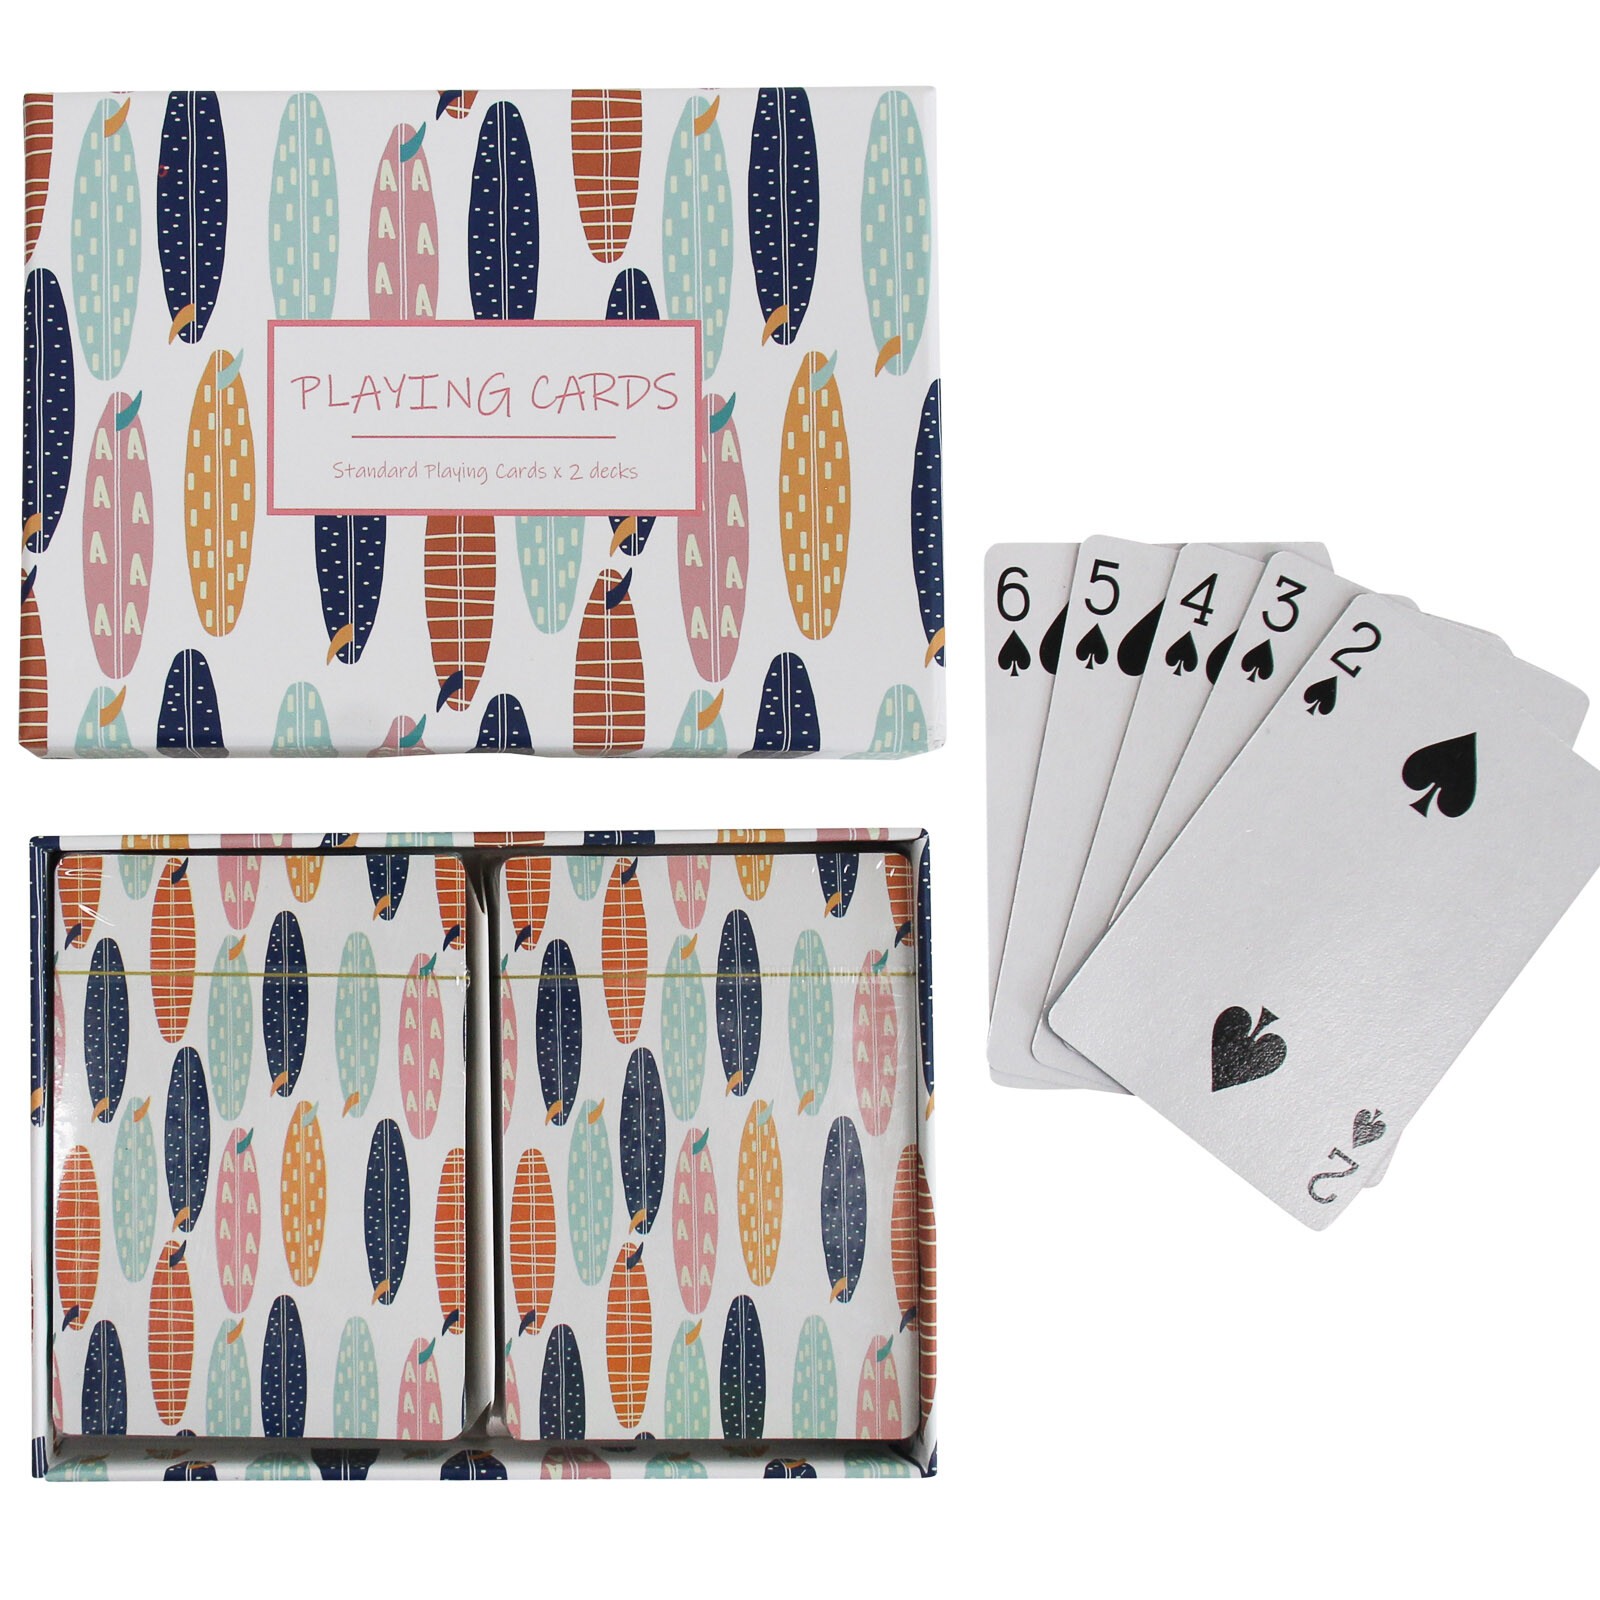 Playing Cards Surfboards